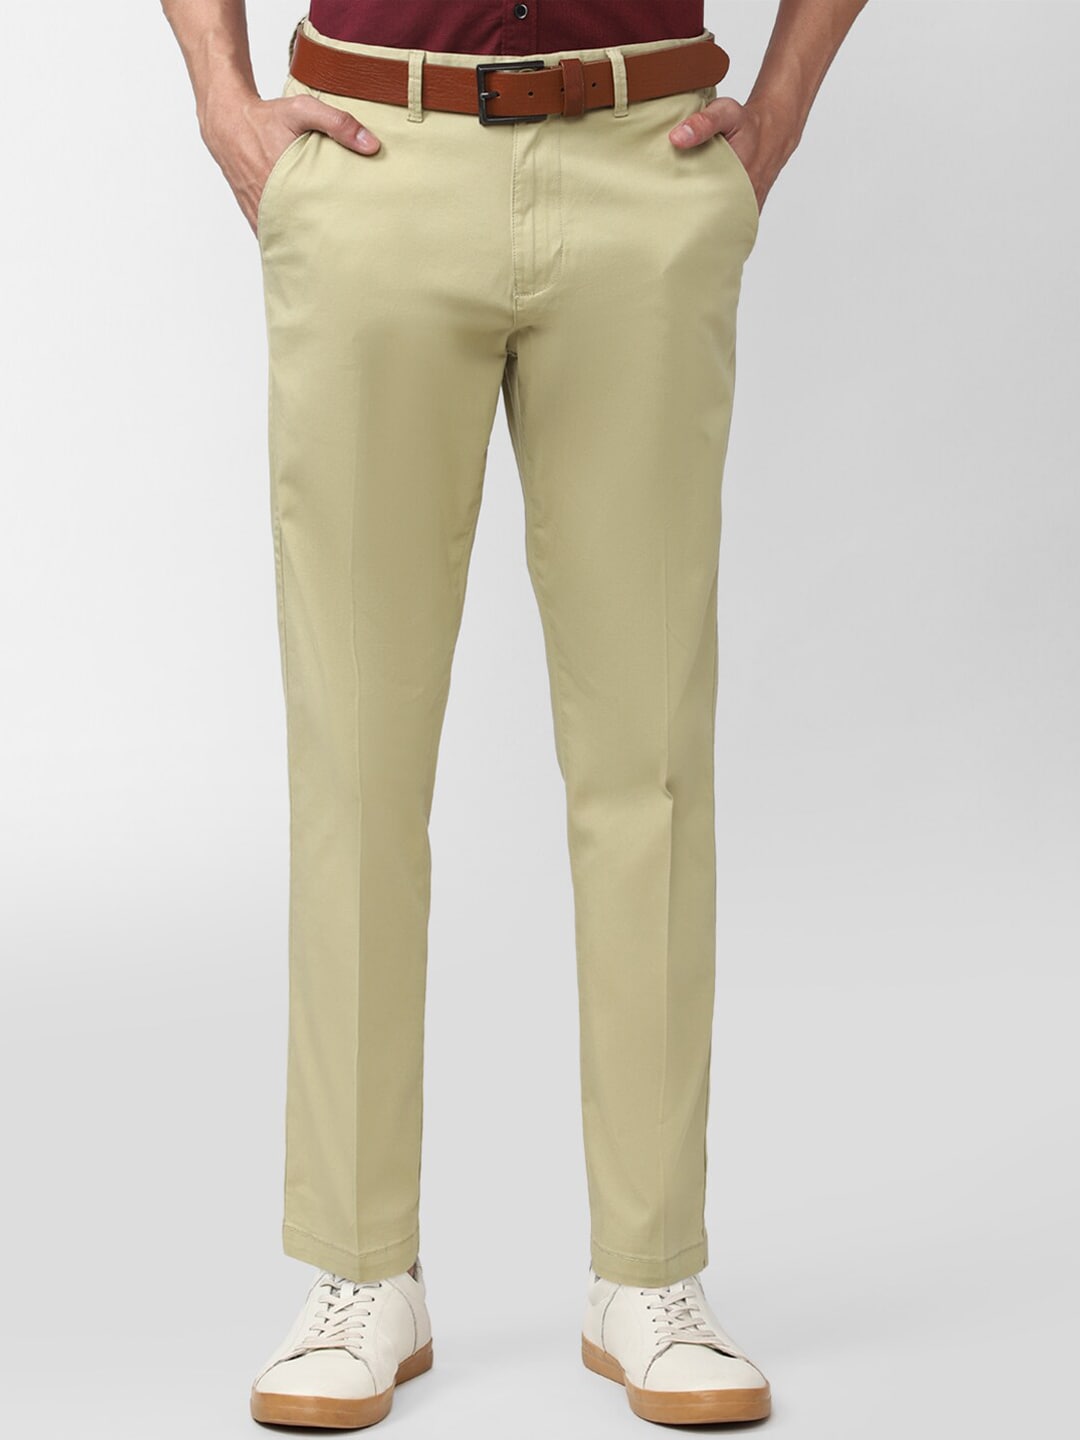 Peter England Casuals Men Yellow Slim Fit Chinos Trousers